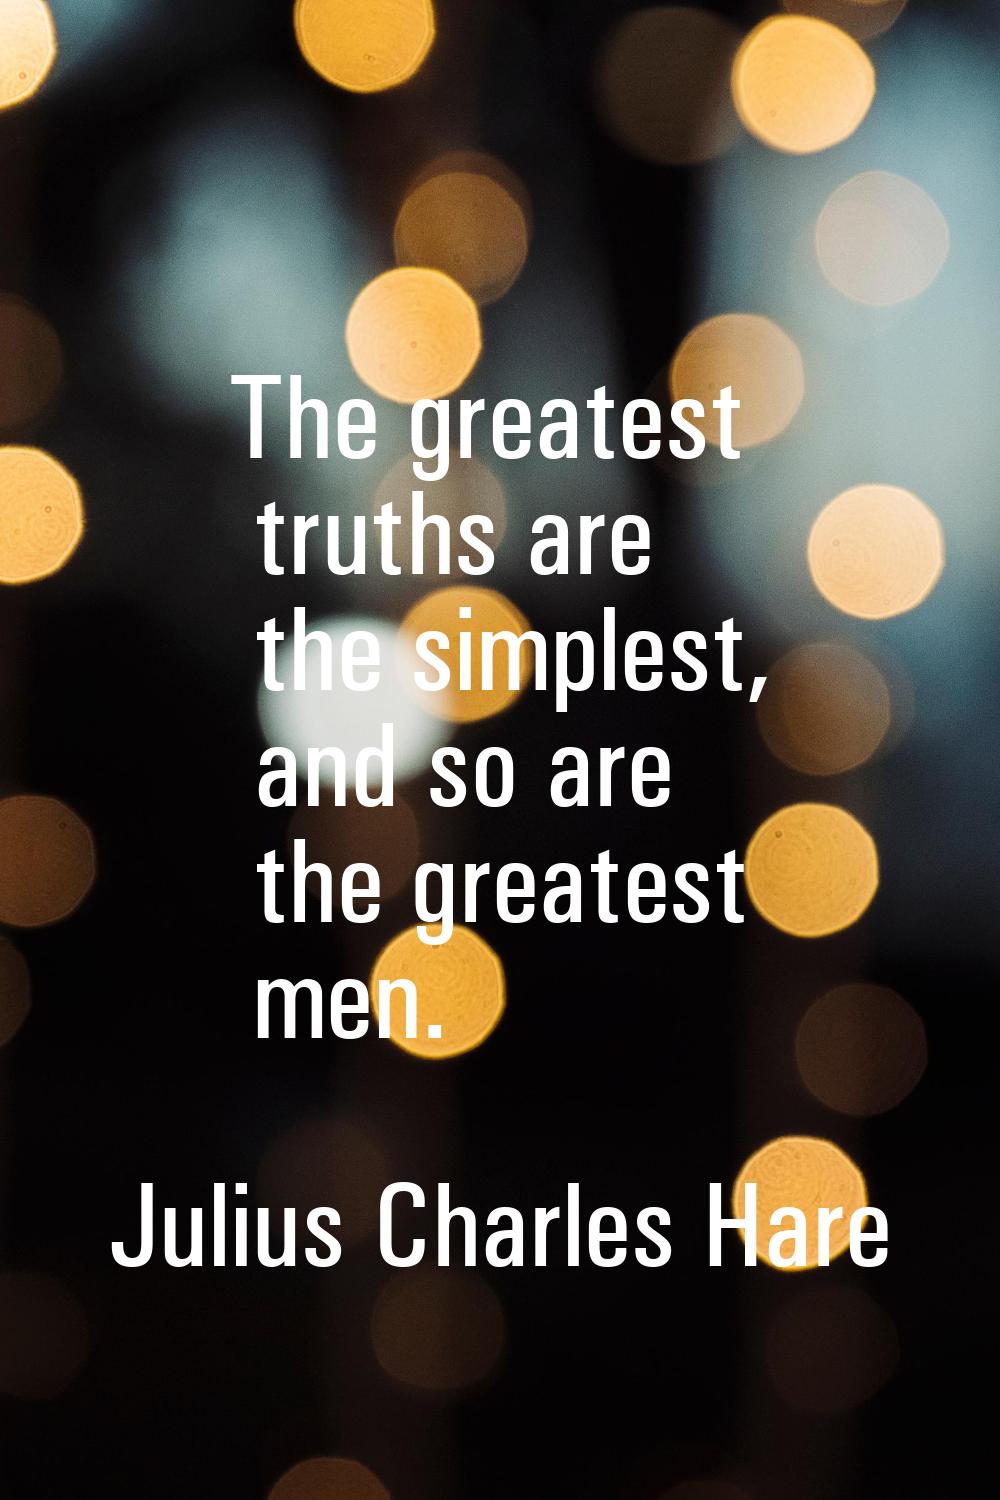 The greatest truths are the simplest, and so are the greatest men.